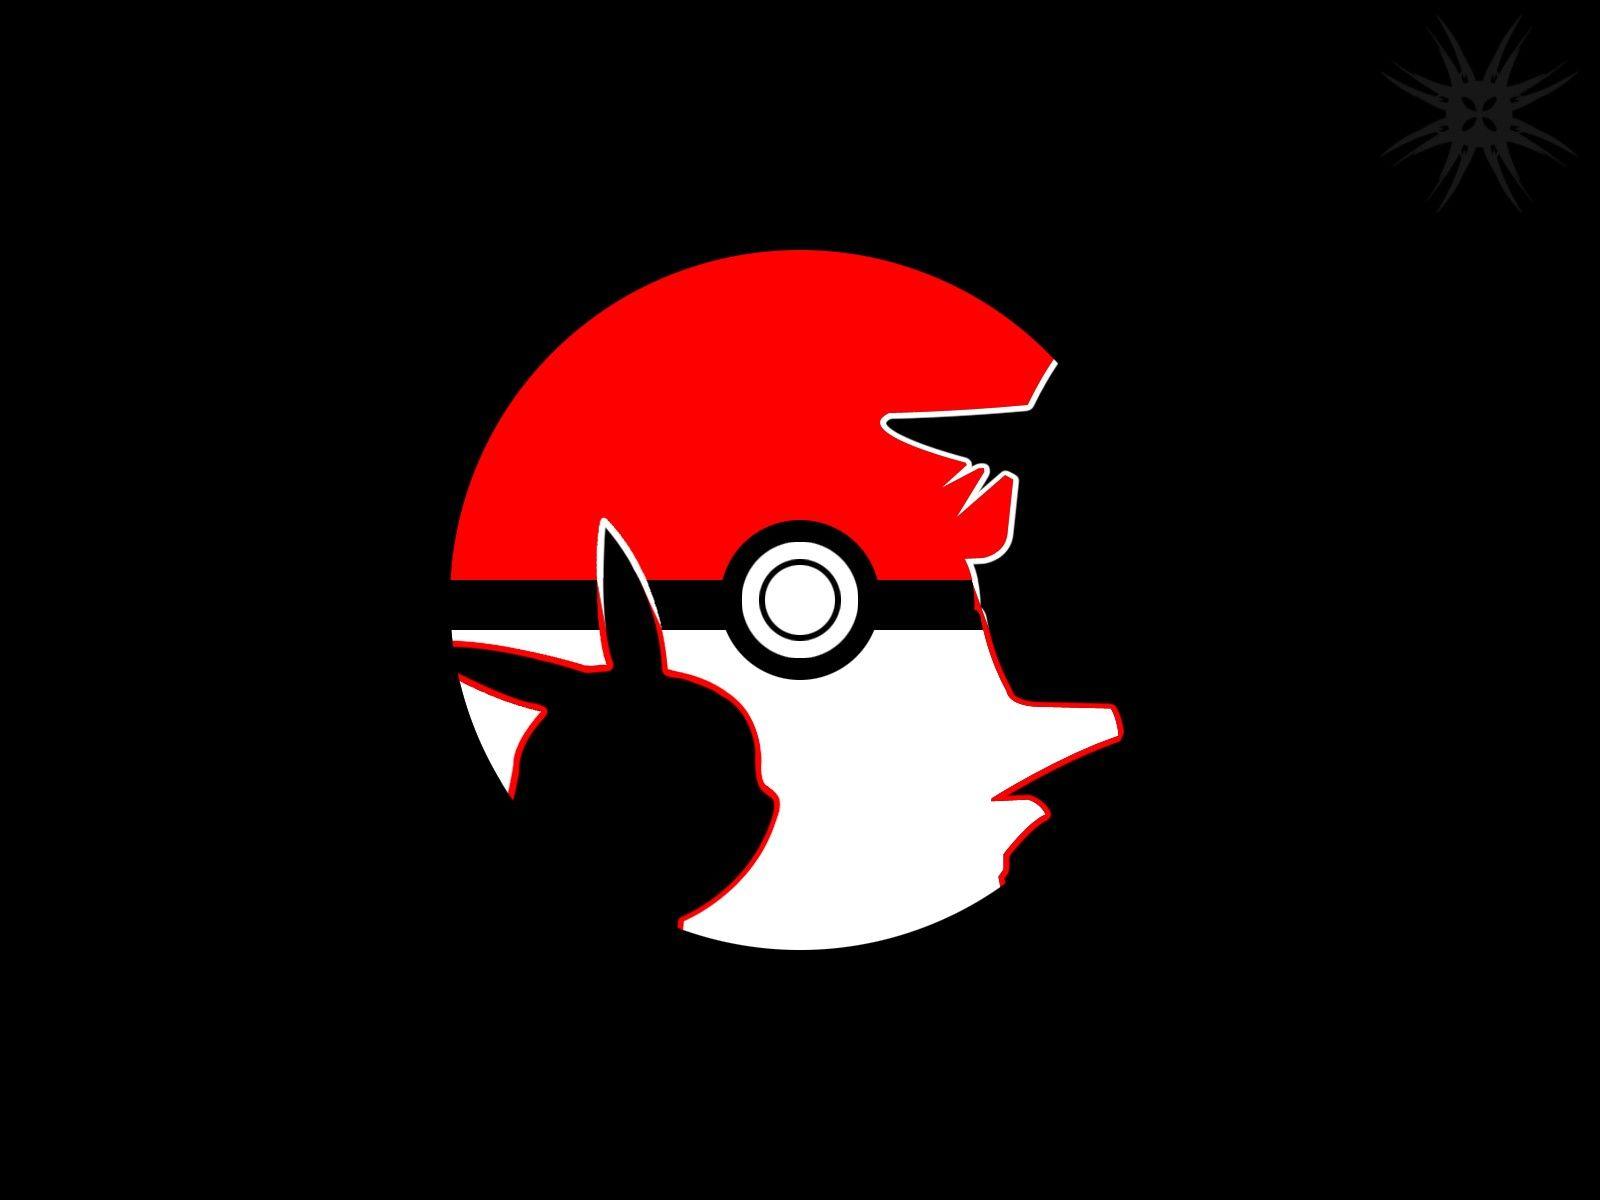 Pokemon red HD wallpapers